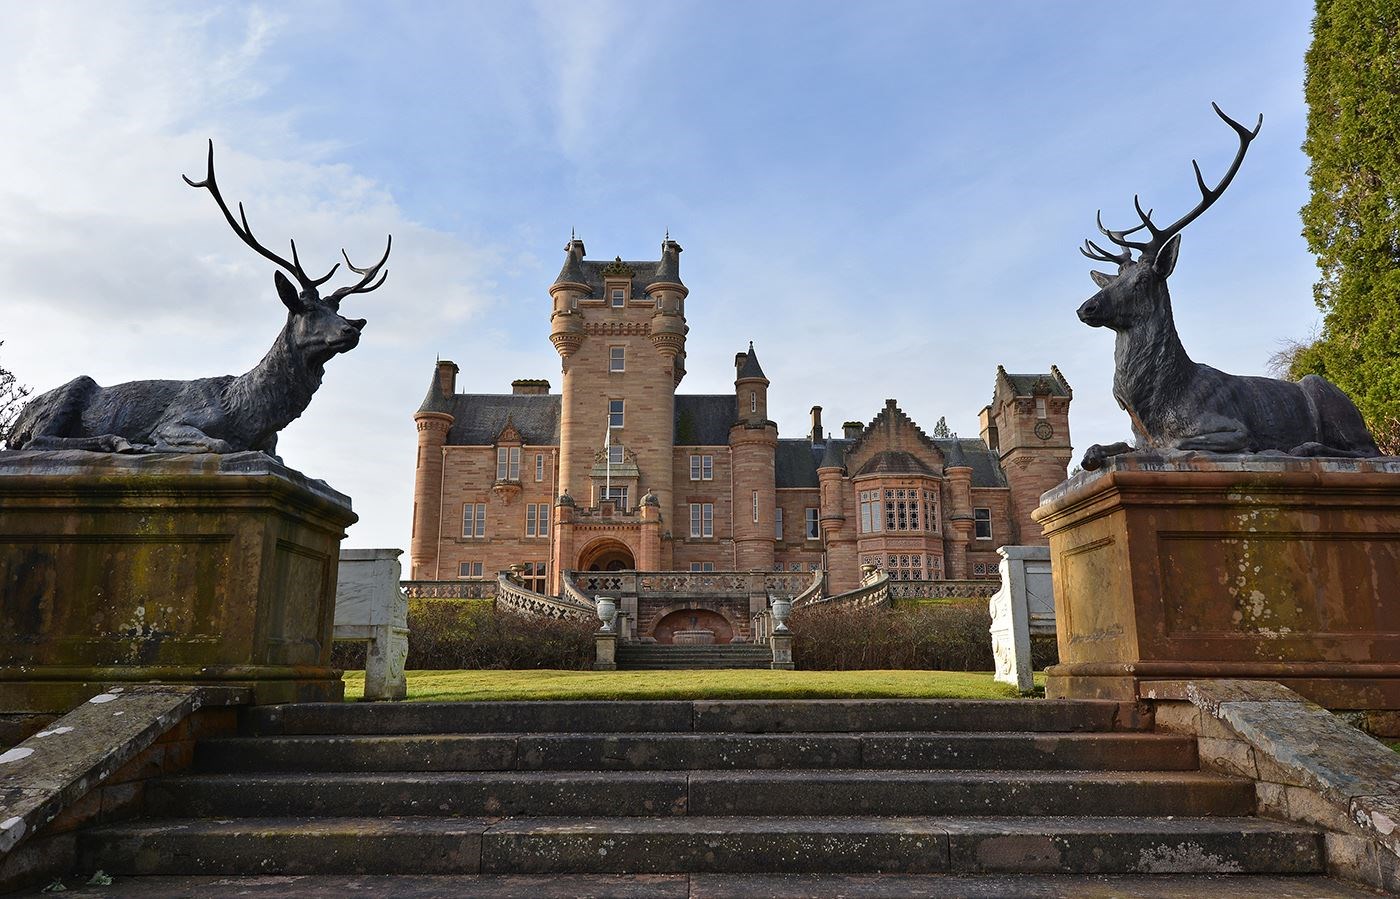 The Traitors is set at Ardross Castle.